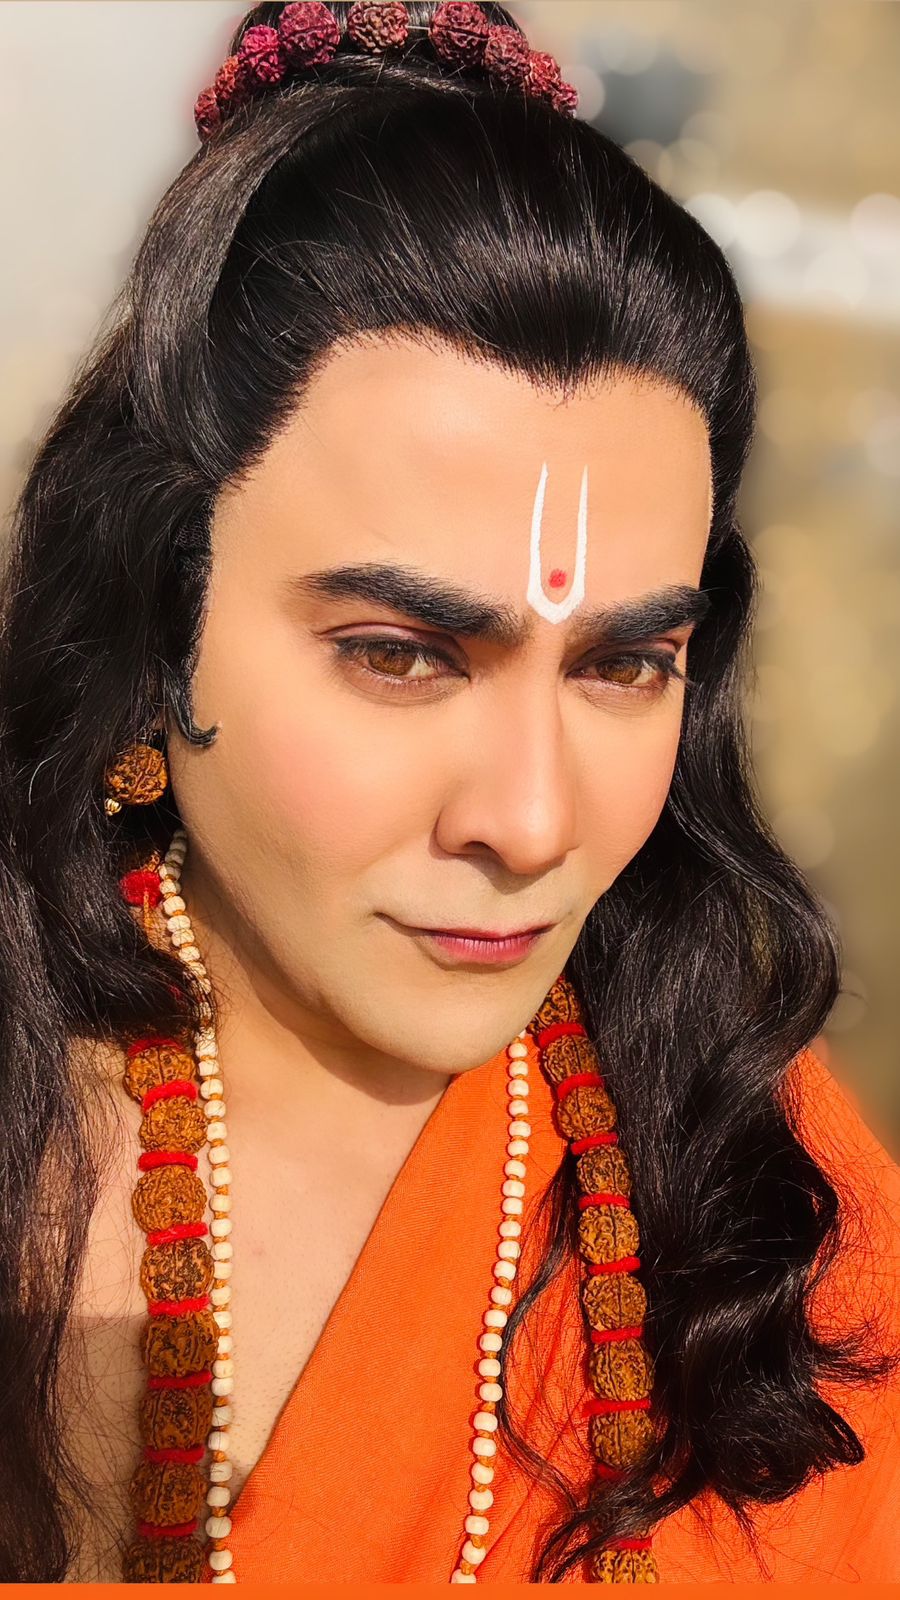 Exclusive! Being An Ardent Devotee Of Lord Ram, Handsome Actor Worship Khanna Disguised As Lord Ram On This Special Day.